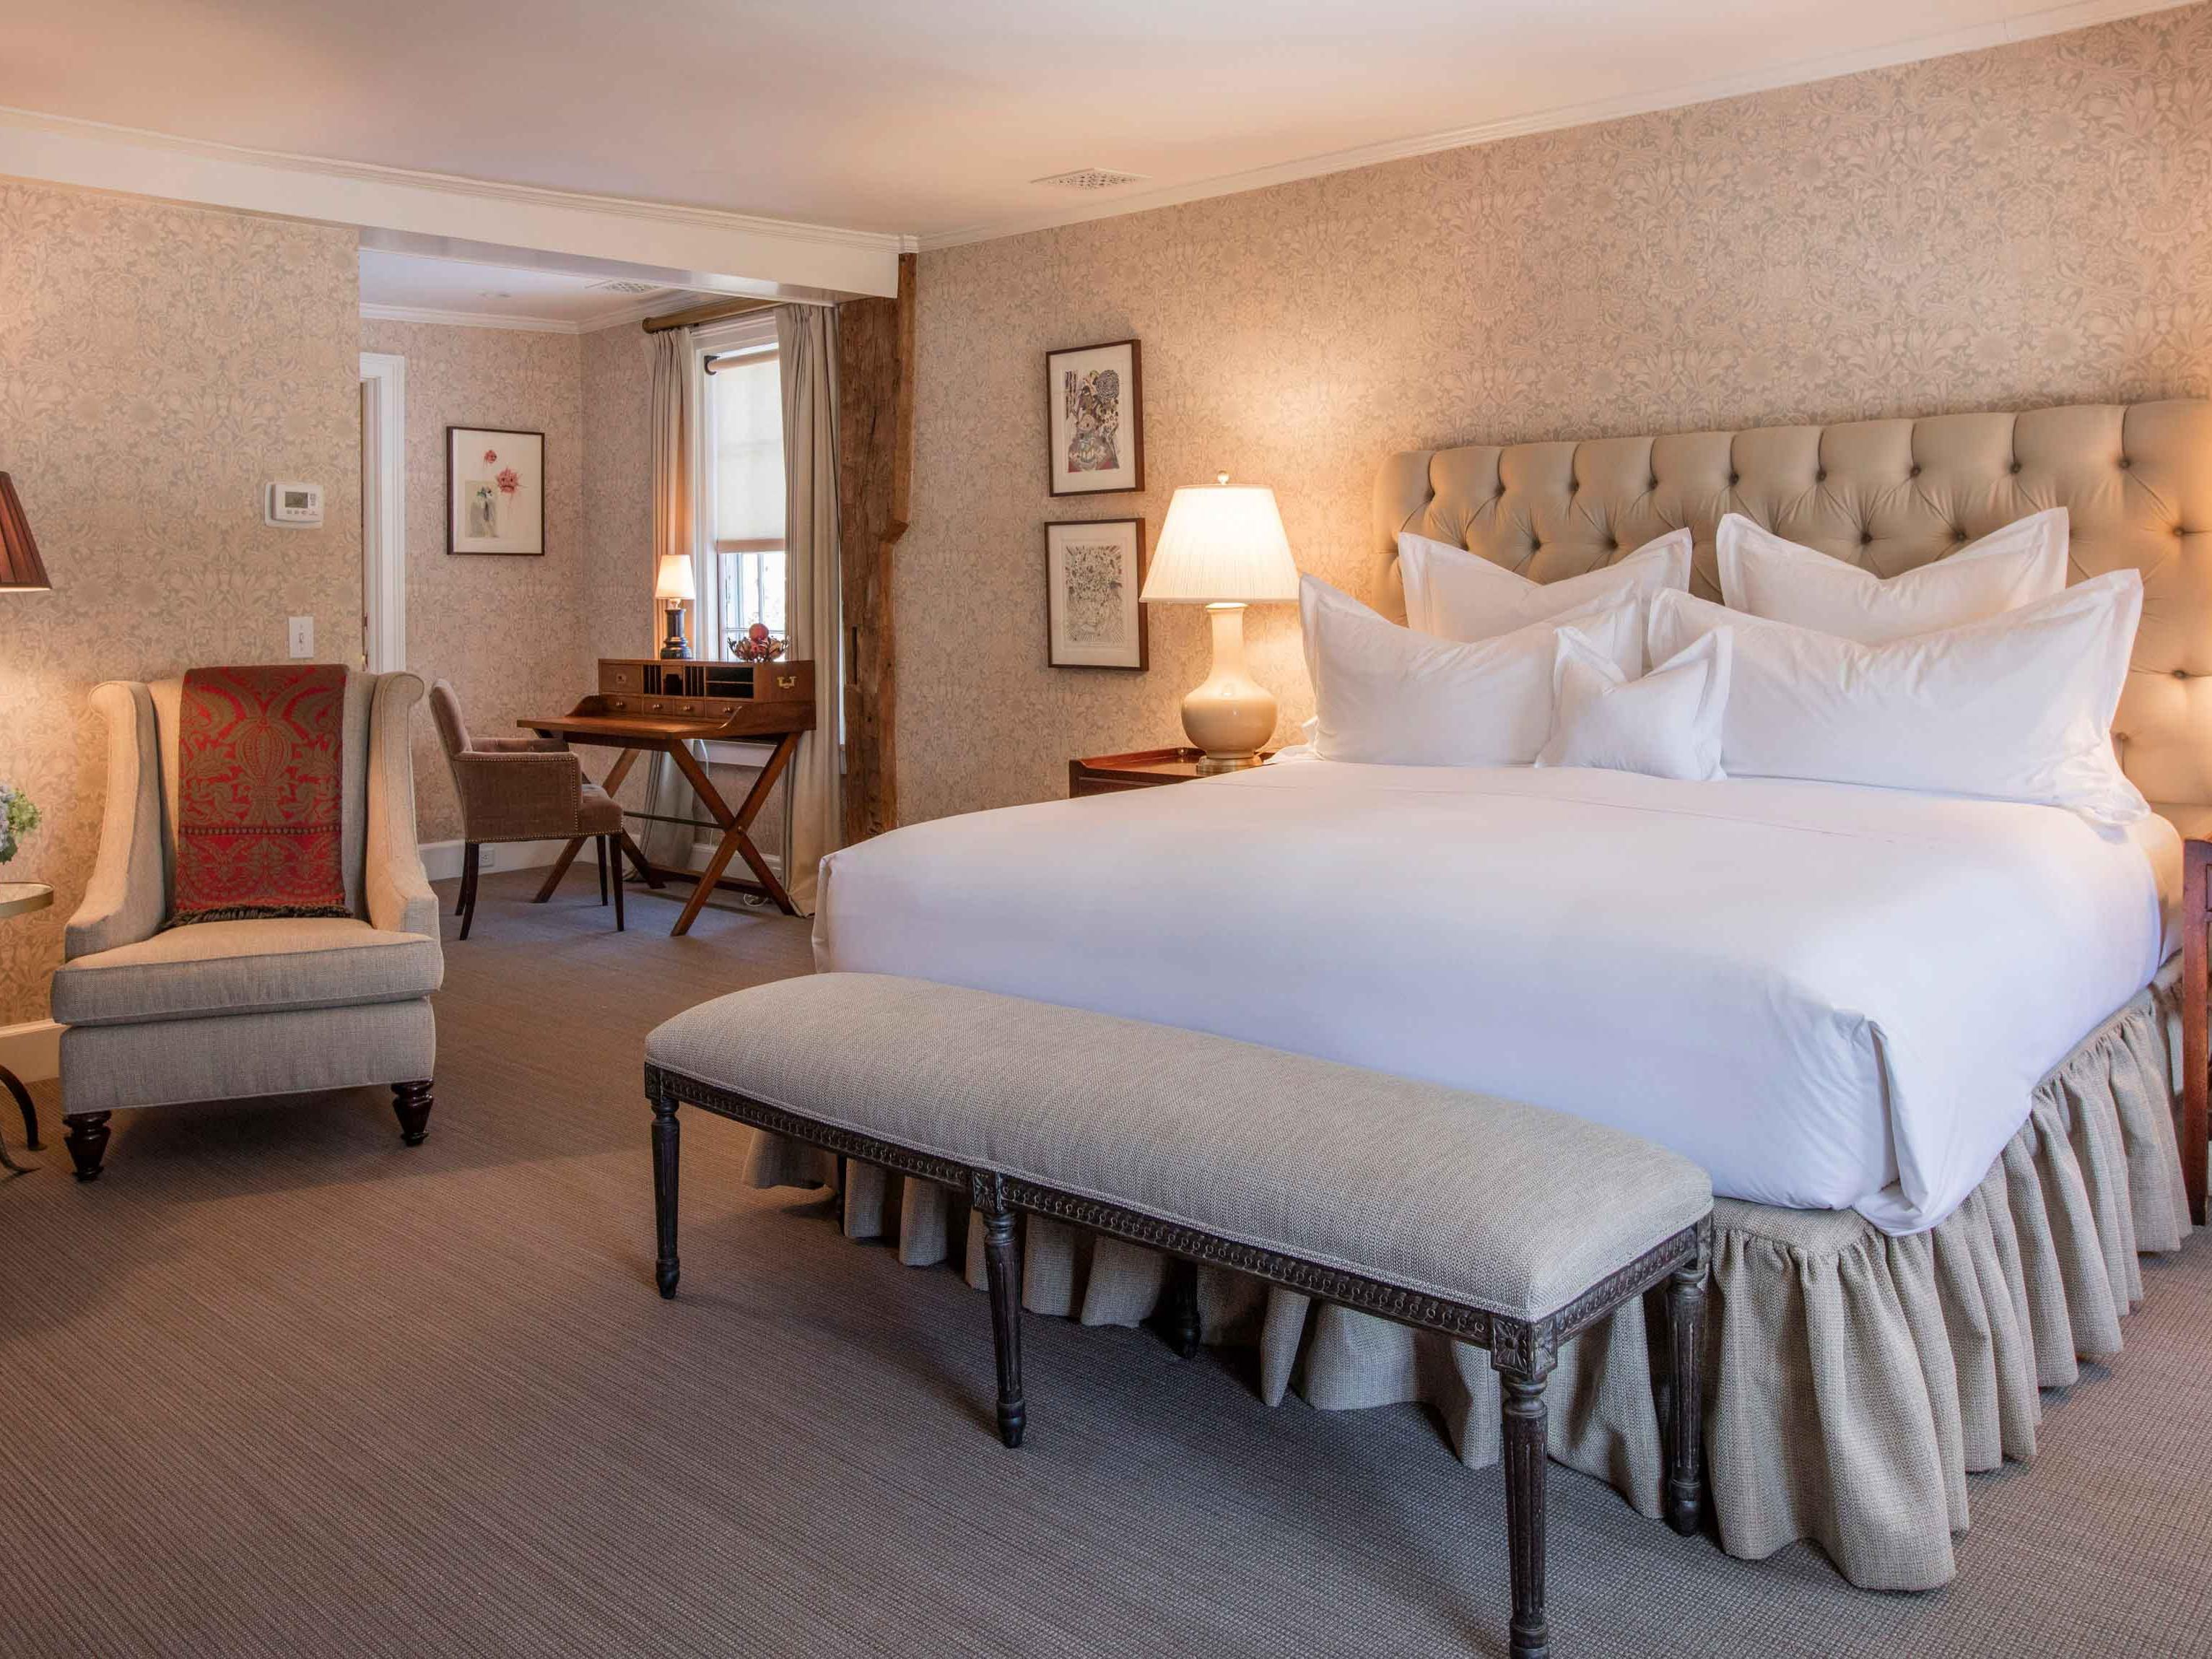 Find New London Hotels Top 5 Hotels In New London Ct By Ihg